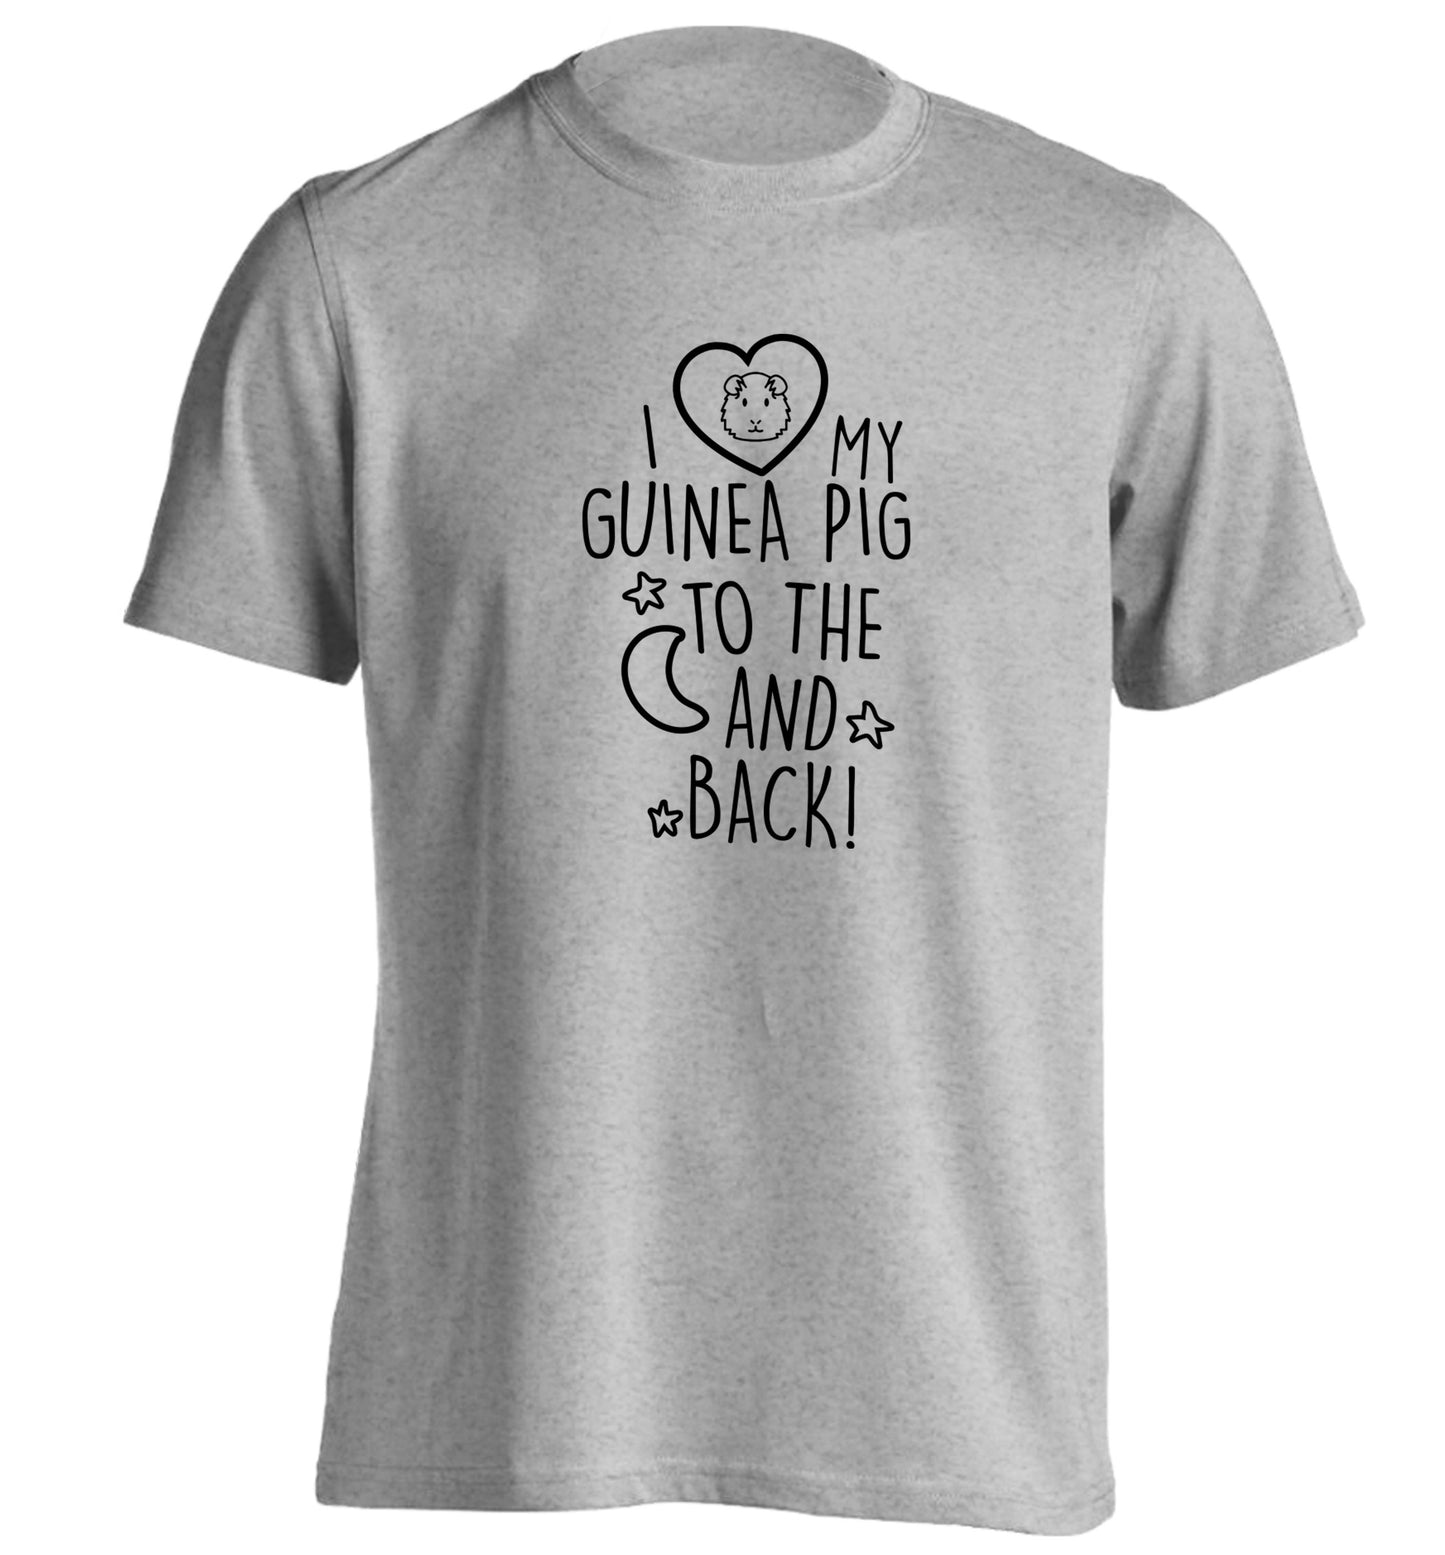 I love my guinea pig to the moon and back adults unisex grey Tshirt 2XL